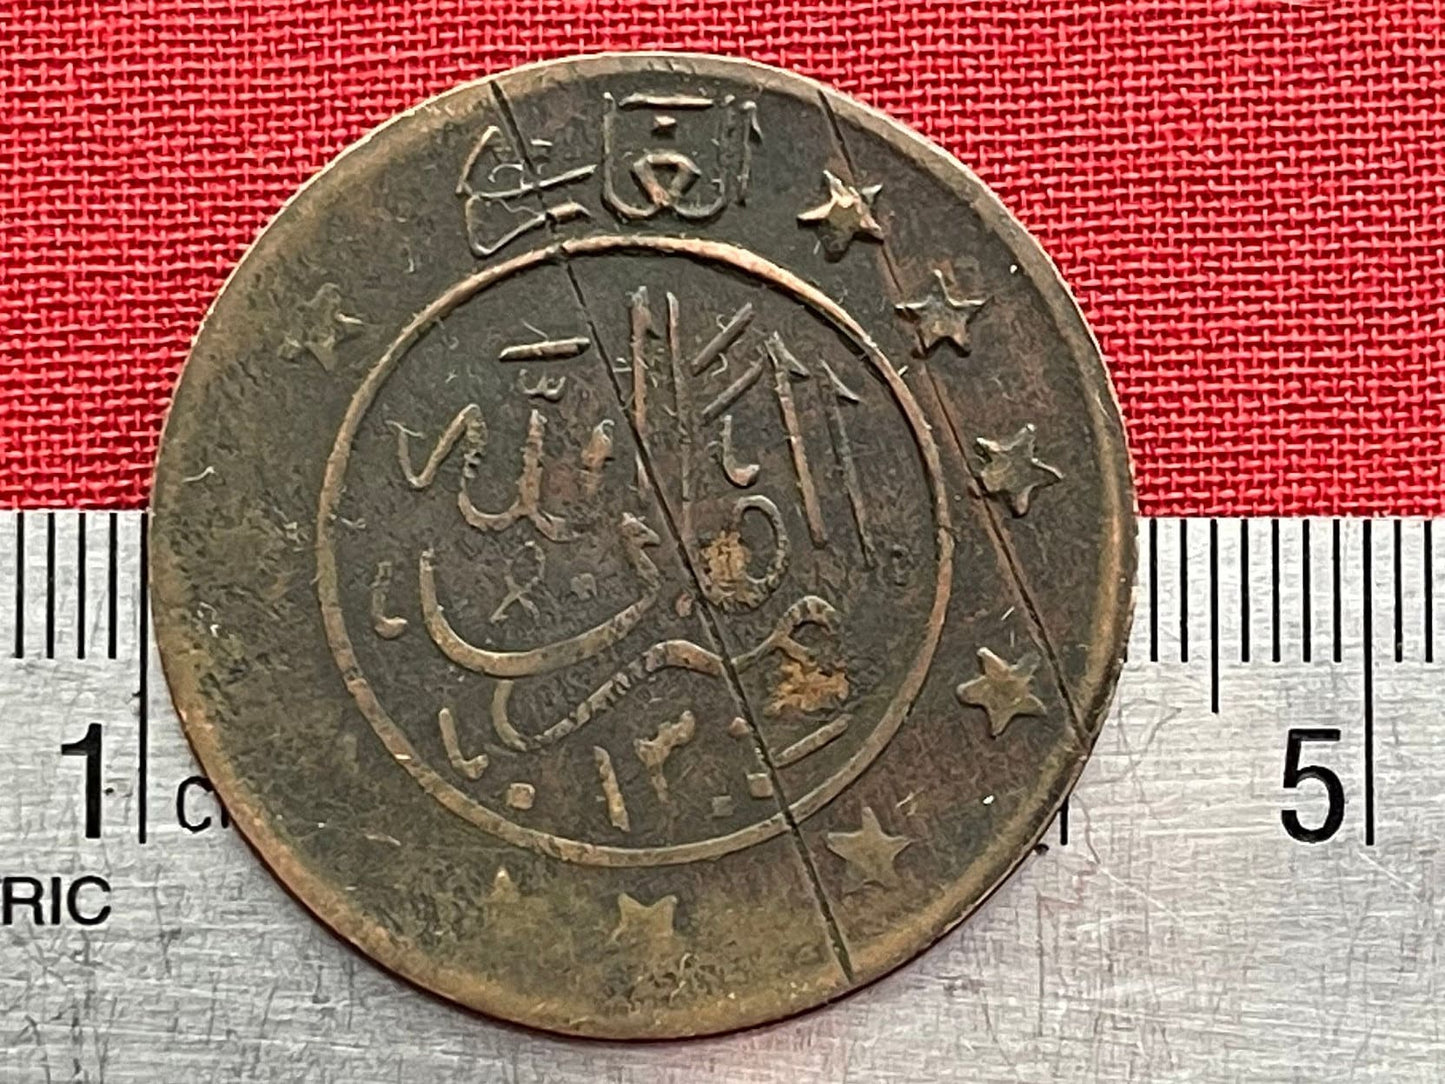 Afghan Mosque with Stars 1919 Great Game Ghazi Amanullah Khan 3 Shahi Afghanistan Authentic Coin Money for Jewelry (CONDITION: Fair)